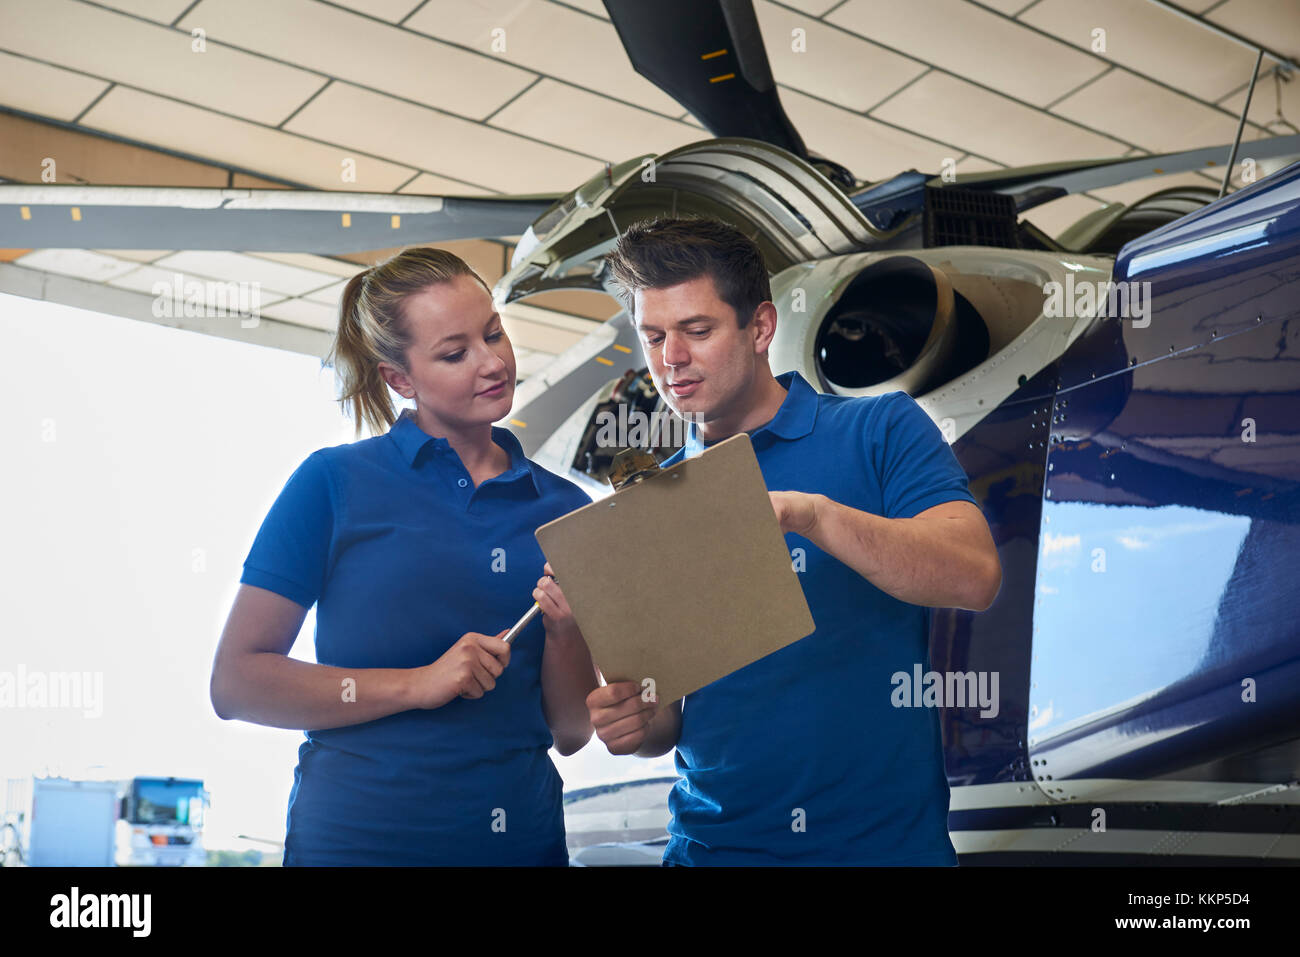 Aero Engineer And Apprentice Working On Helicopter In Hangar Looking At Clipboard Stock Photo